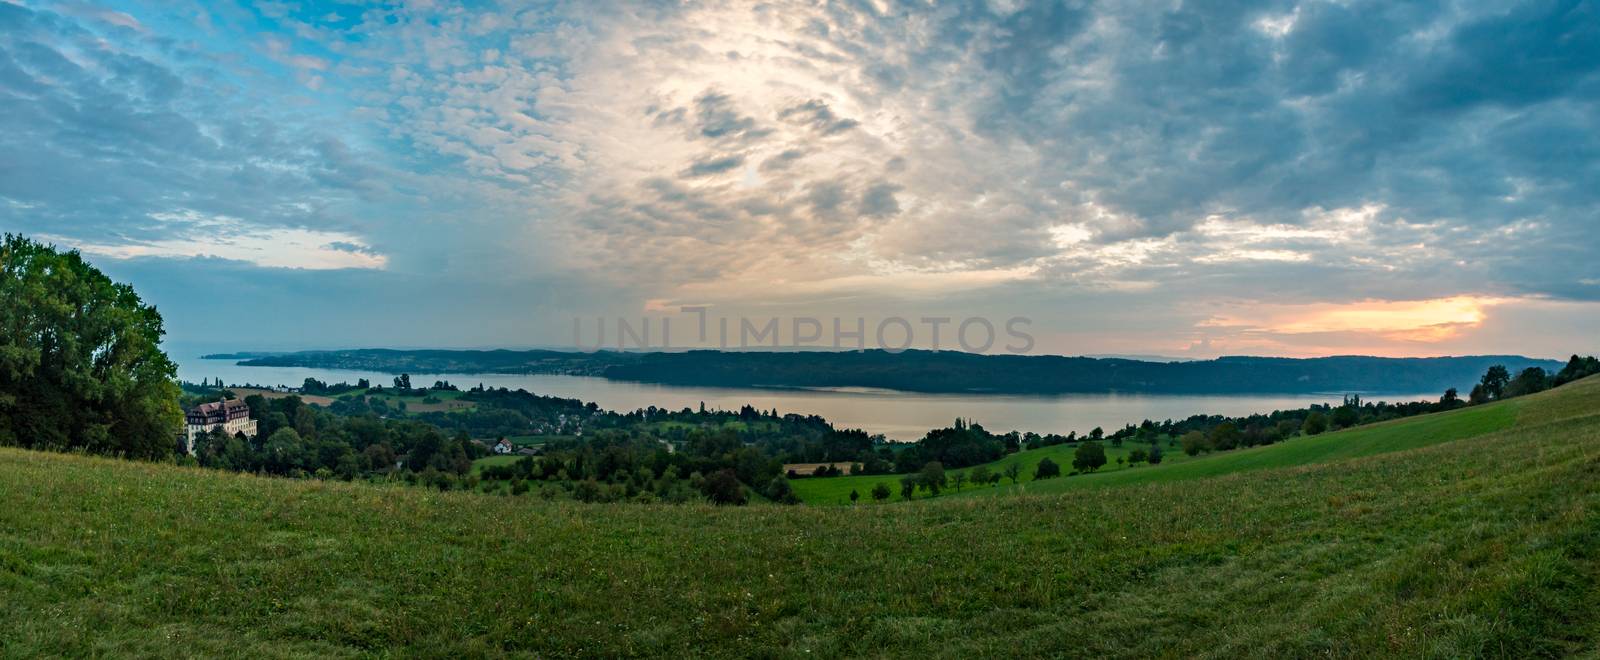 Wonderful autumn hike near Sipplingen and Uberlingen on Lake Constance by mindscapephotos